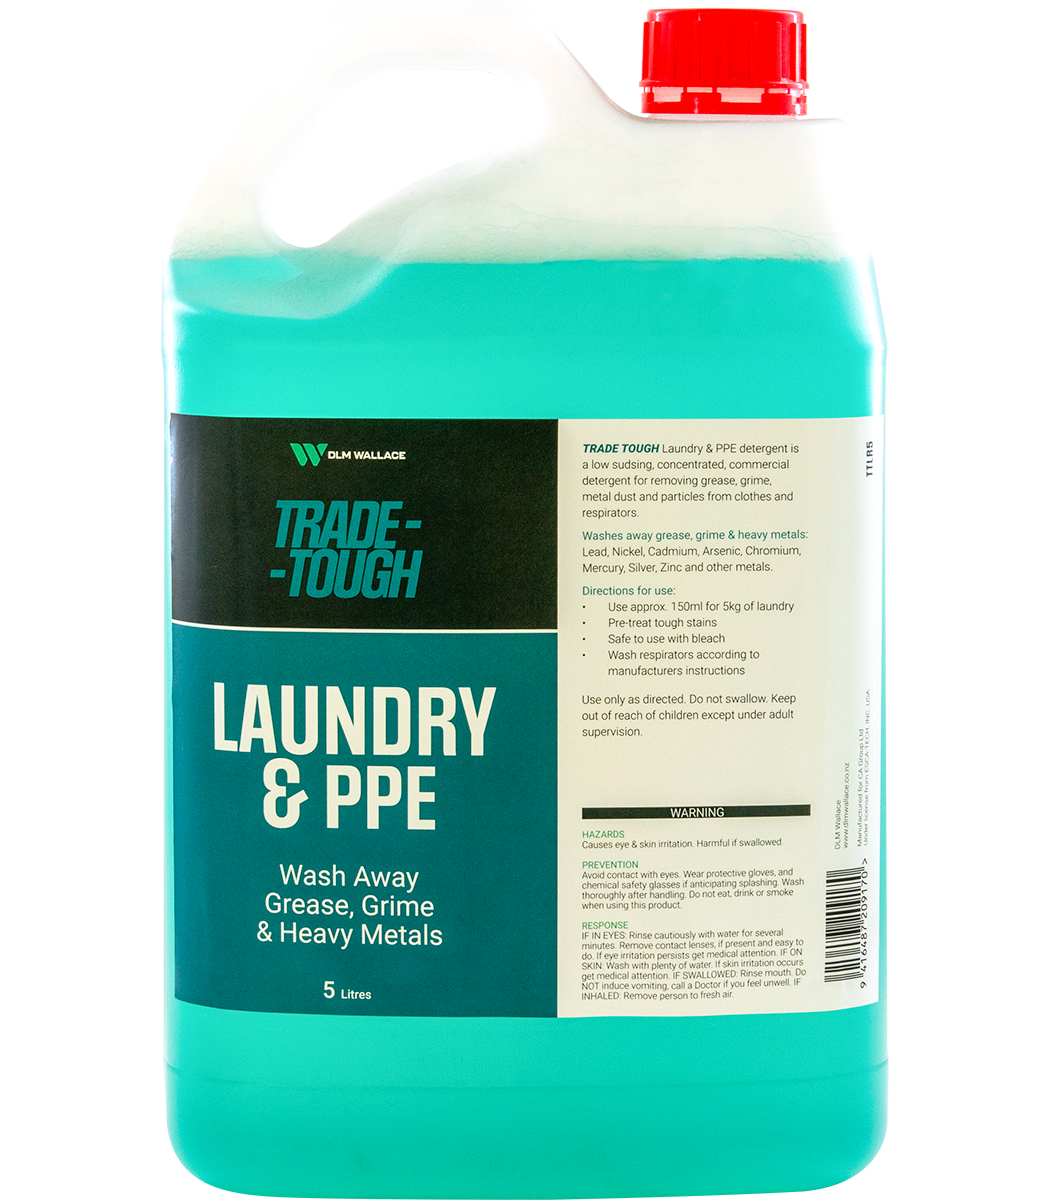 Wesbite Name: Trade-Tough Laundry Detergent & PPE